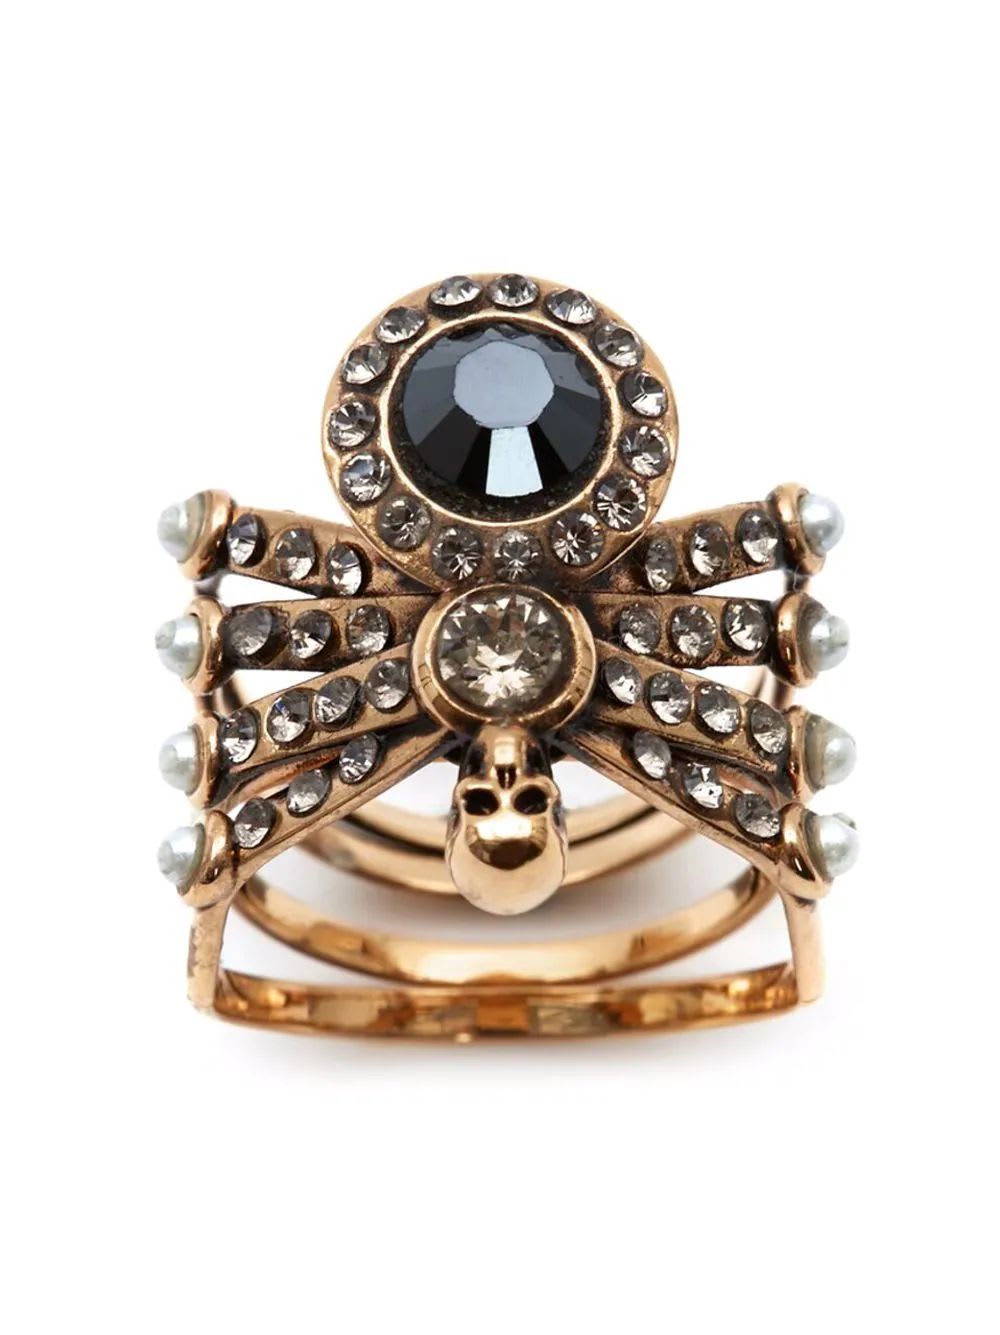 Spider Ring In Antique Gold